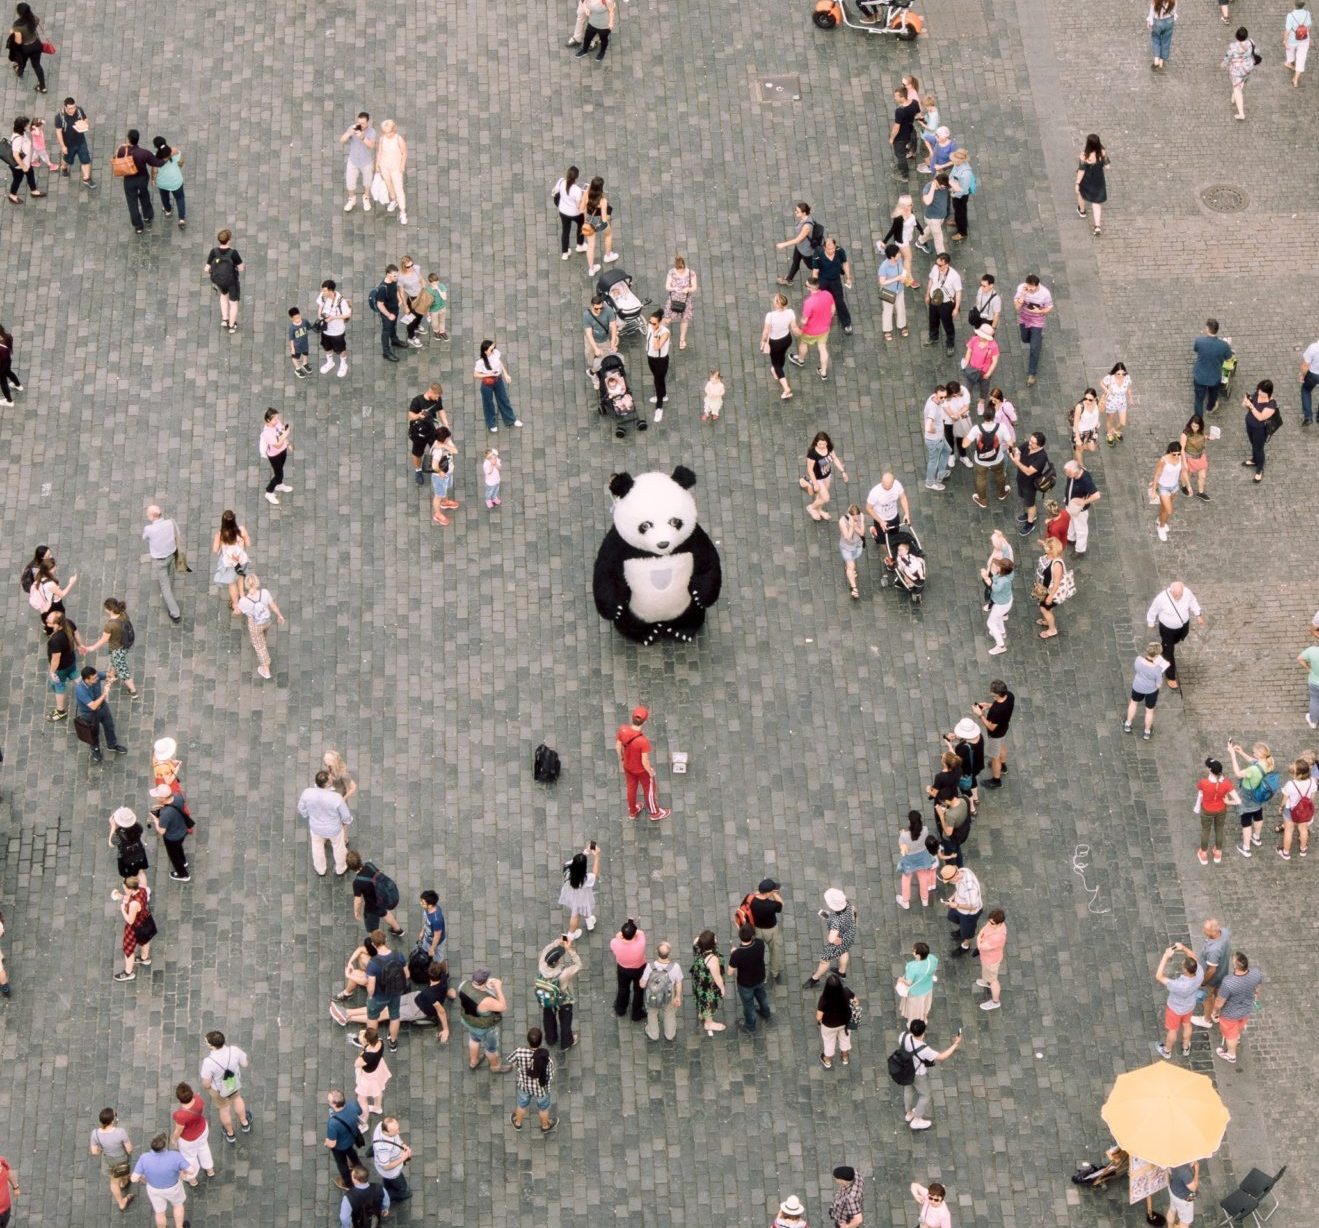 A group of people surrounding a person in a panda costume